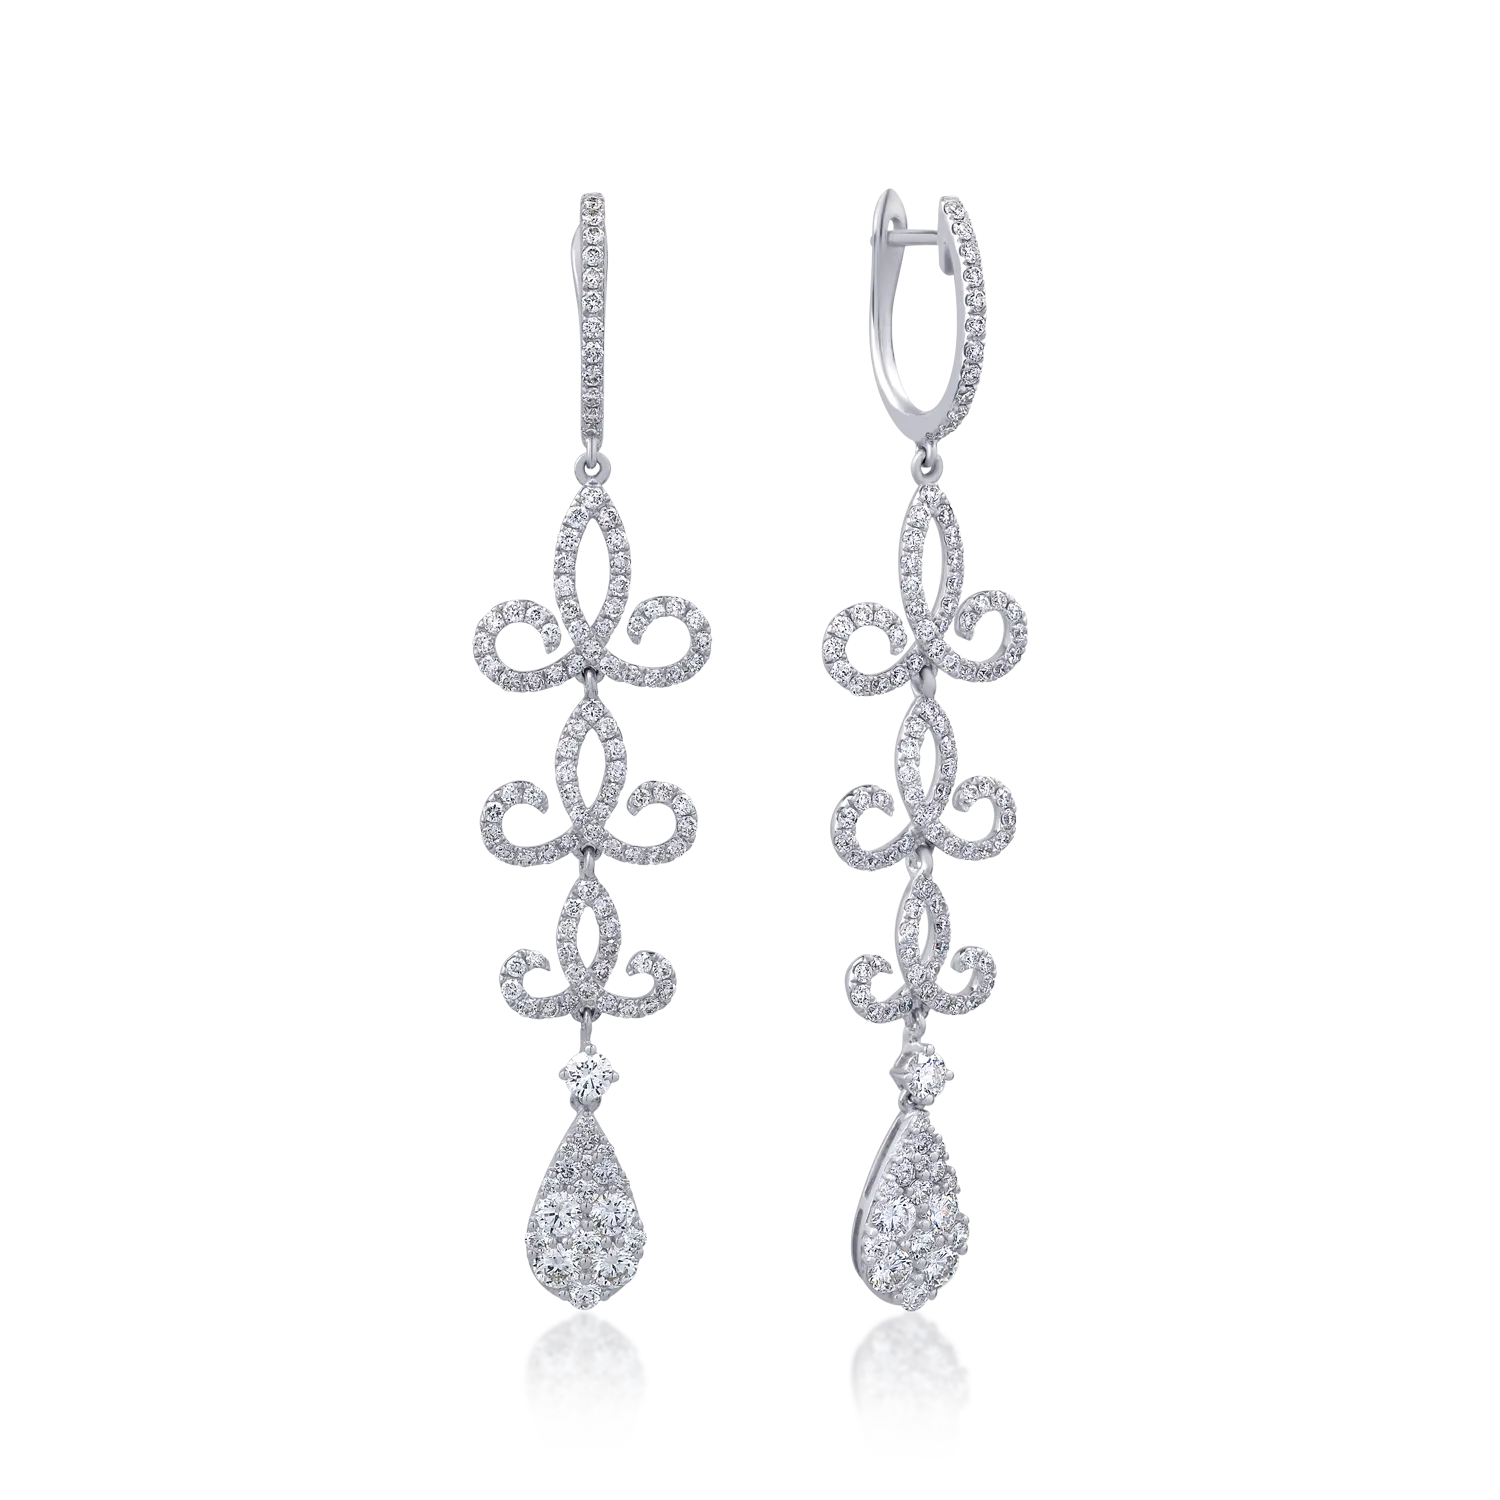 18K white gold earrings with 2.61ct diamonds